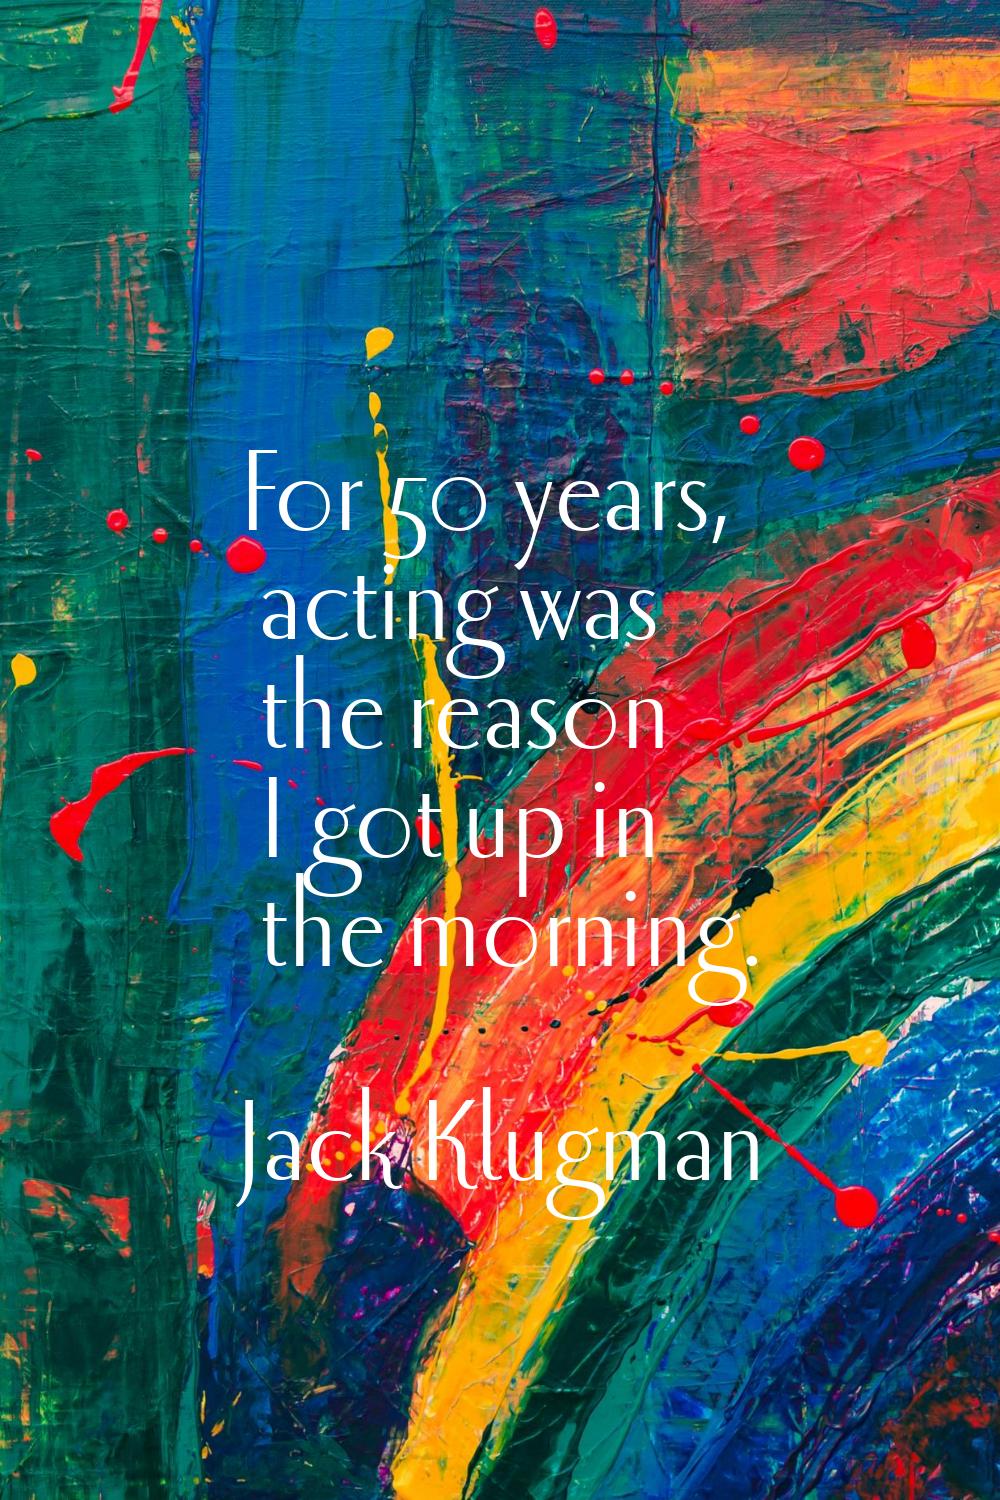 For 50 years, acting was the reason I got up in the morning.